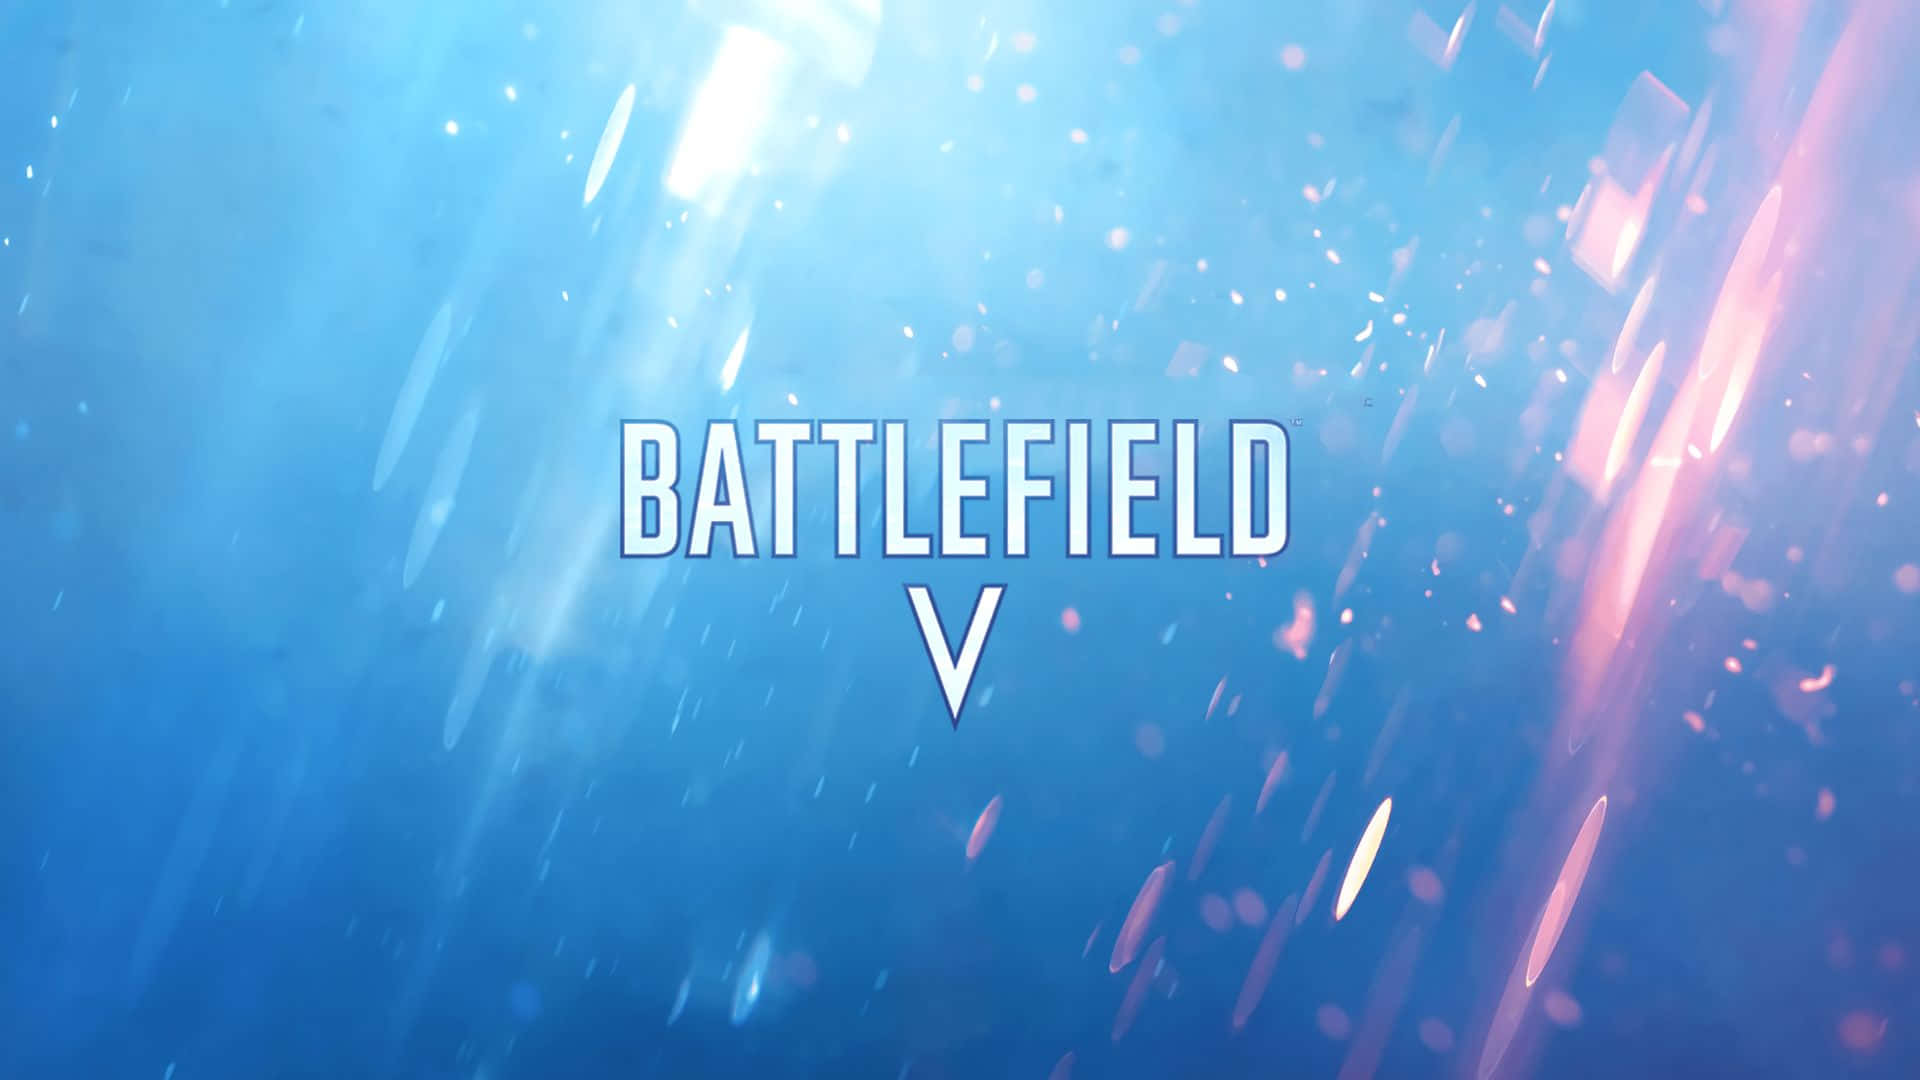 Exploring the Battlefield in Stunning 1080p Quality